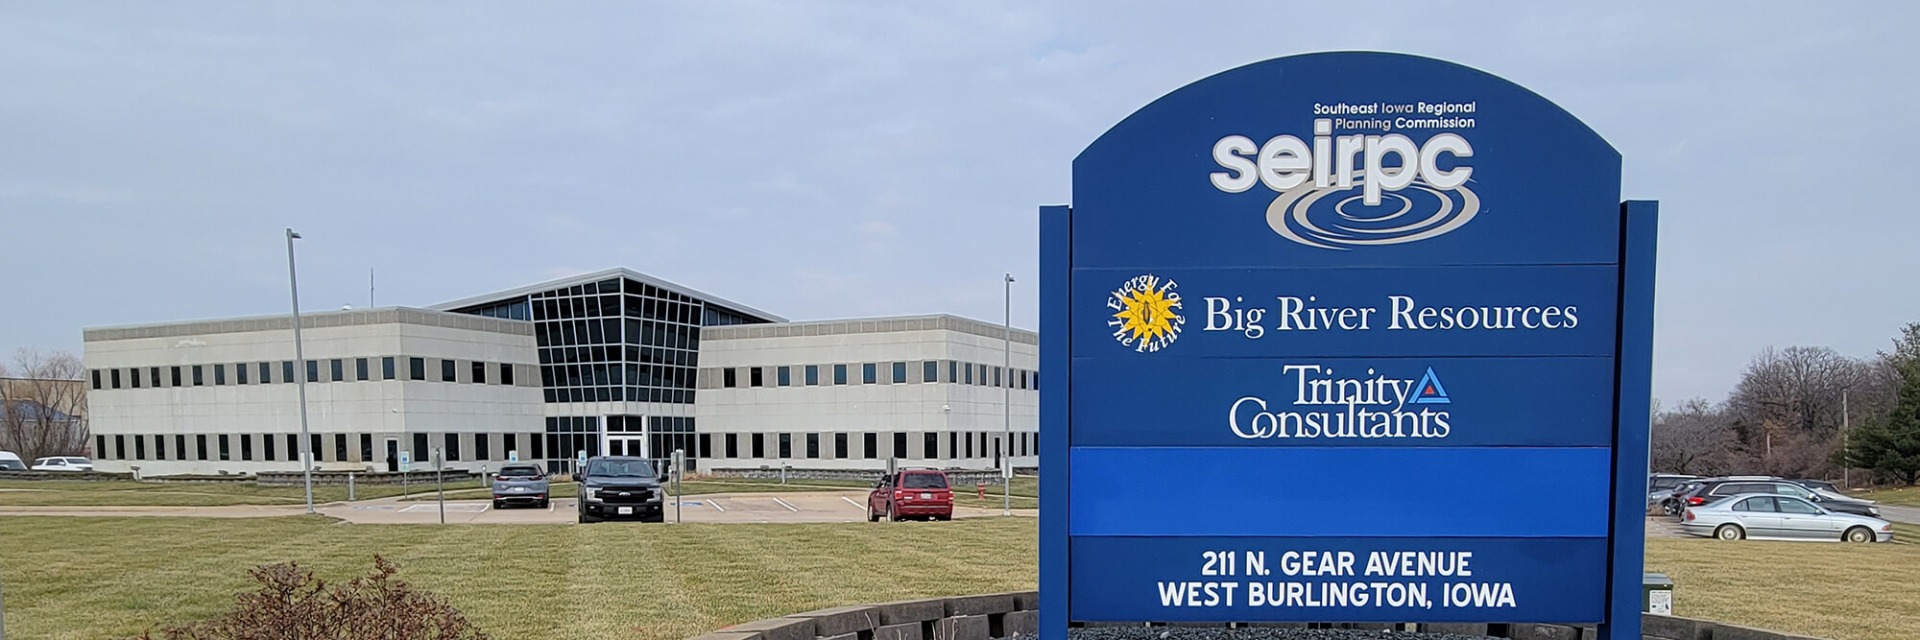 SEIRPC building and sign in Des Moines County, Iowa